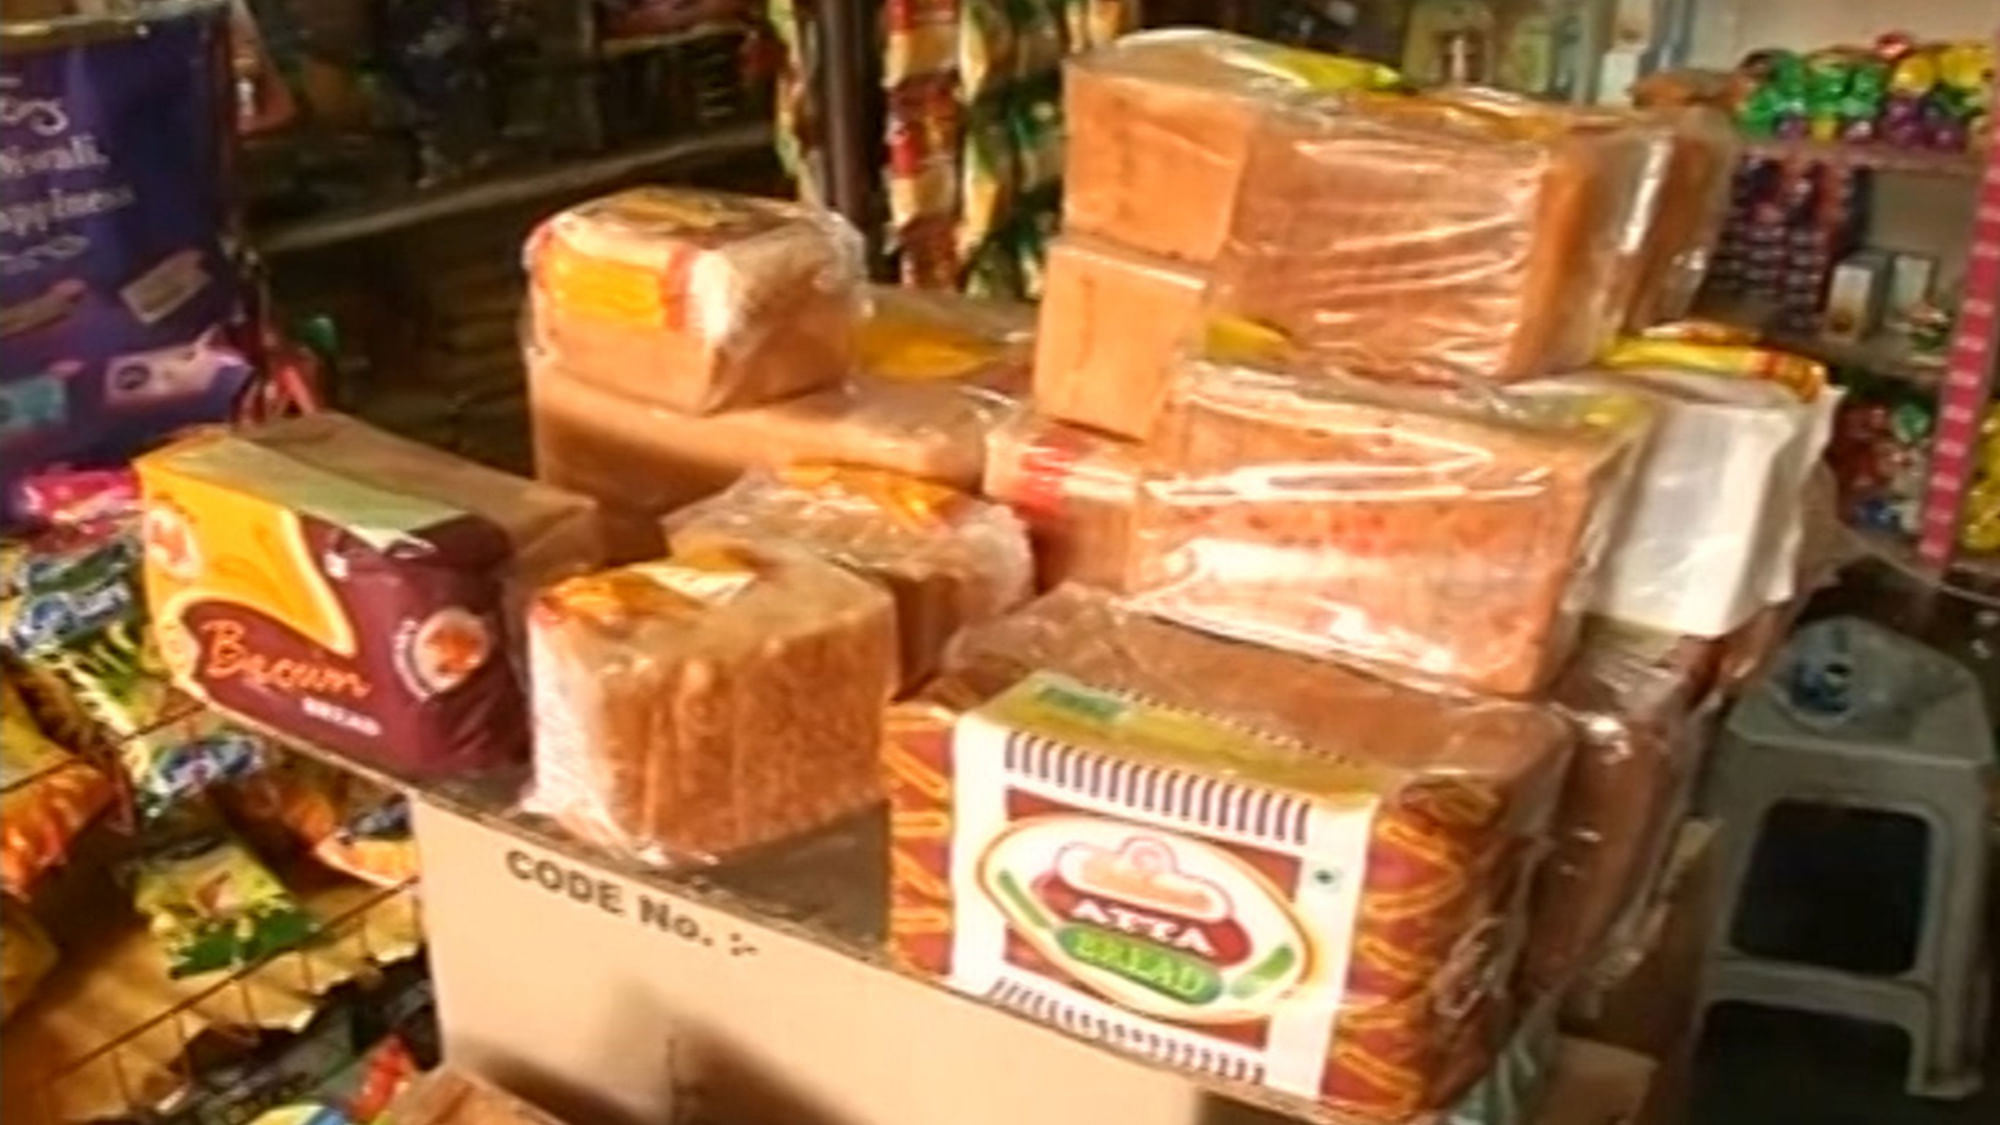 Bread samples across Delhi have been found to contain carcinogenic chemicals by CSE, a scientific body. (Photo: ANI)